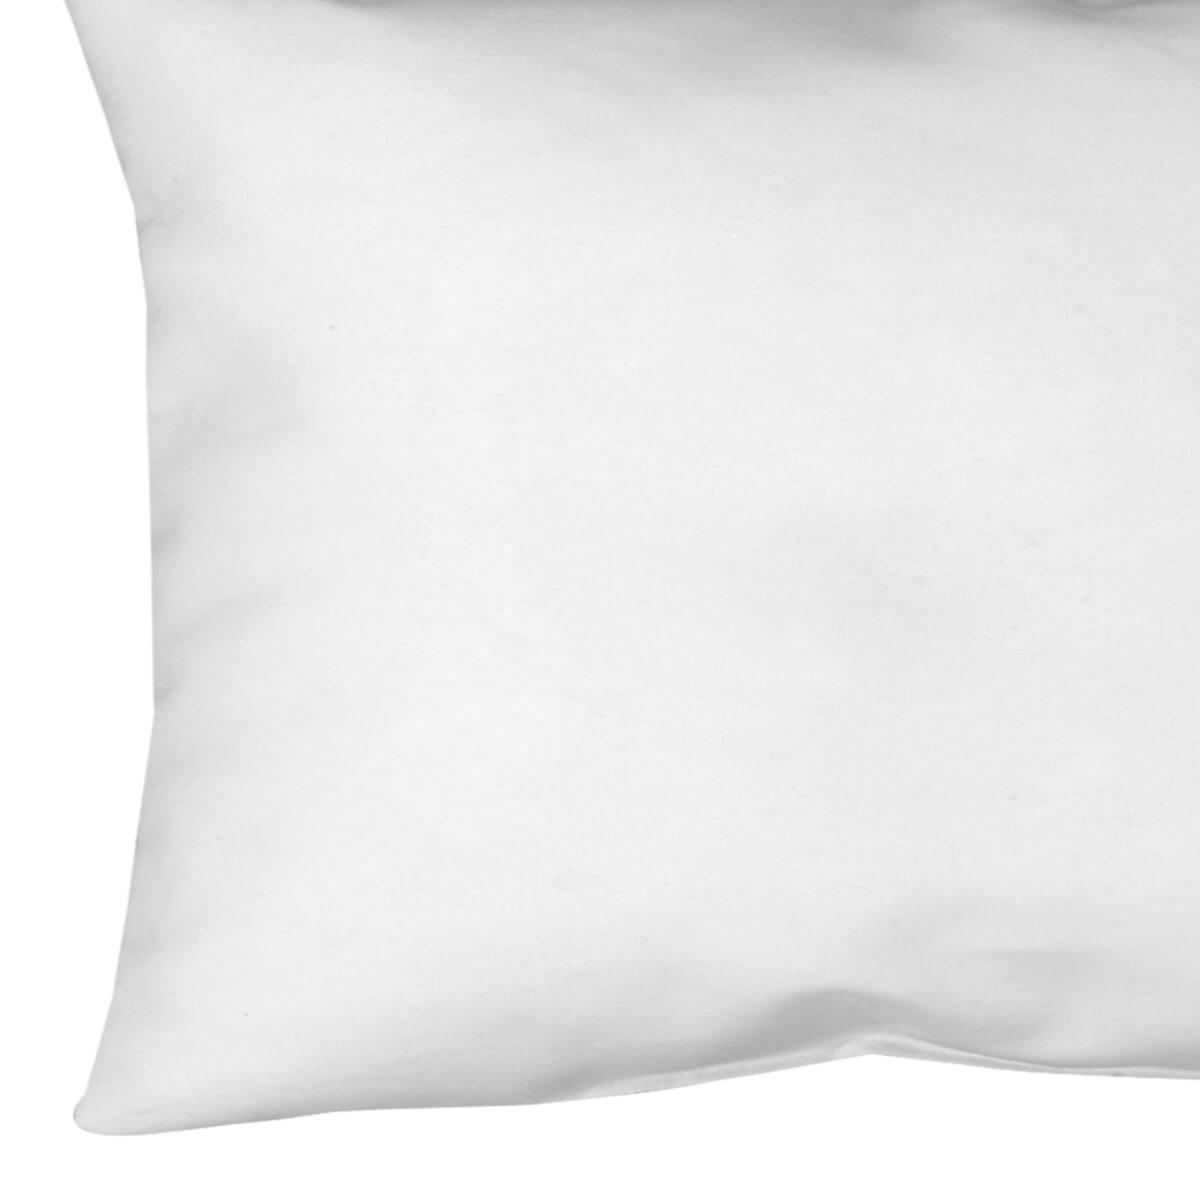 Rainbow Pride Cotton Twill Pillow with zipper.